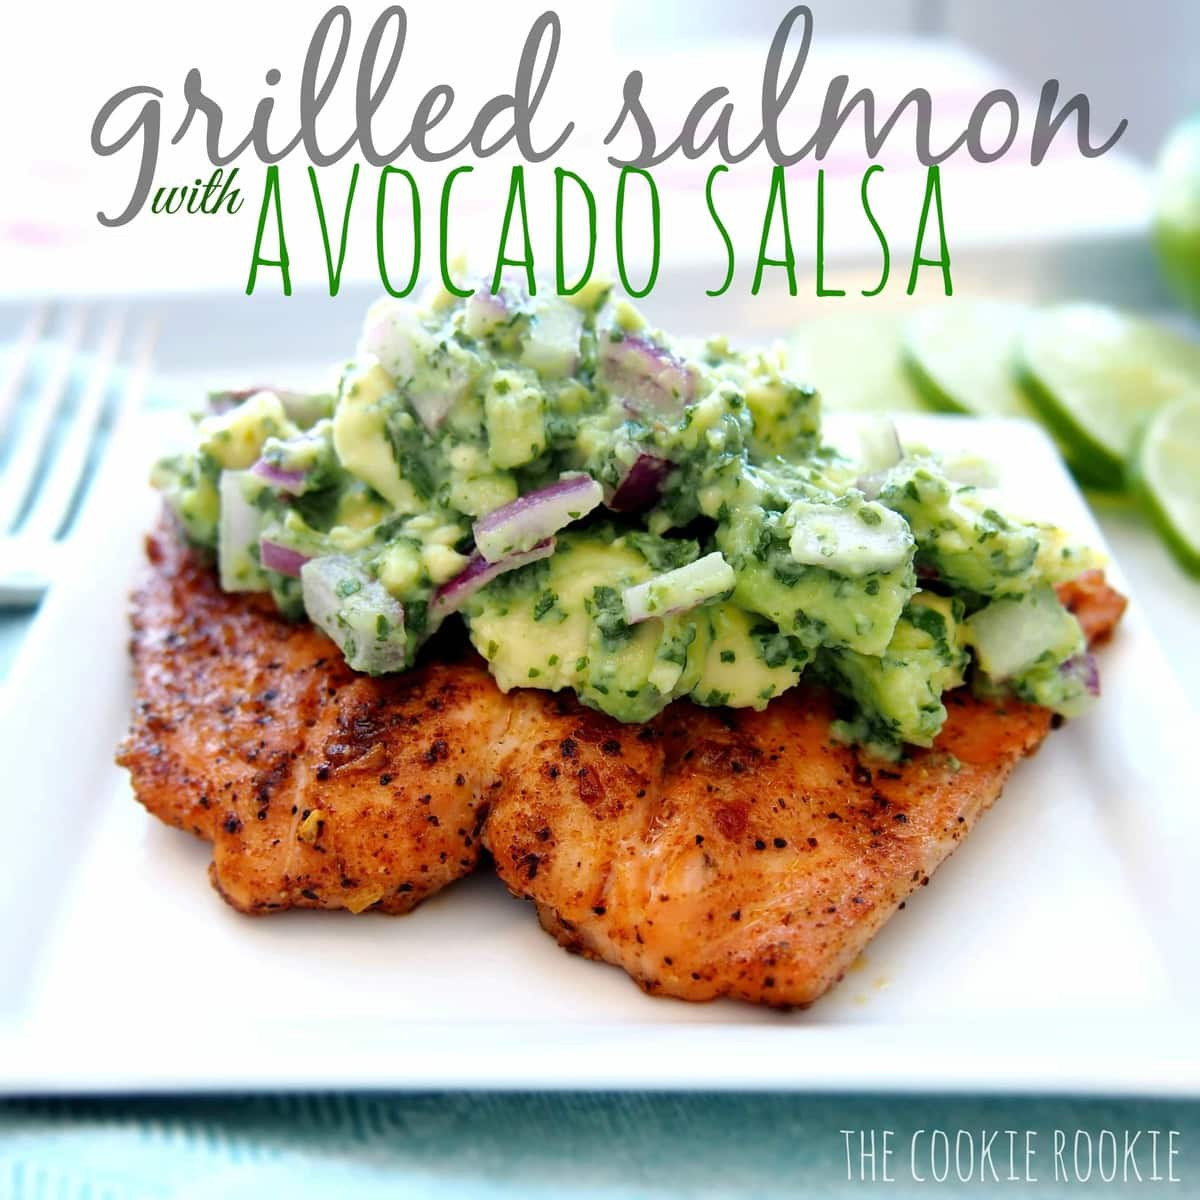 Salmon And Avocado Recipes
 Whole30 Grilled Salmon with Avocado Salsa Recipe The